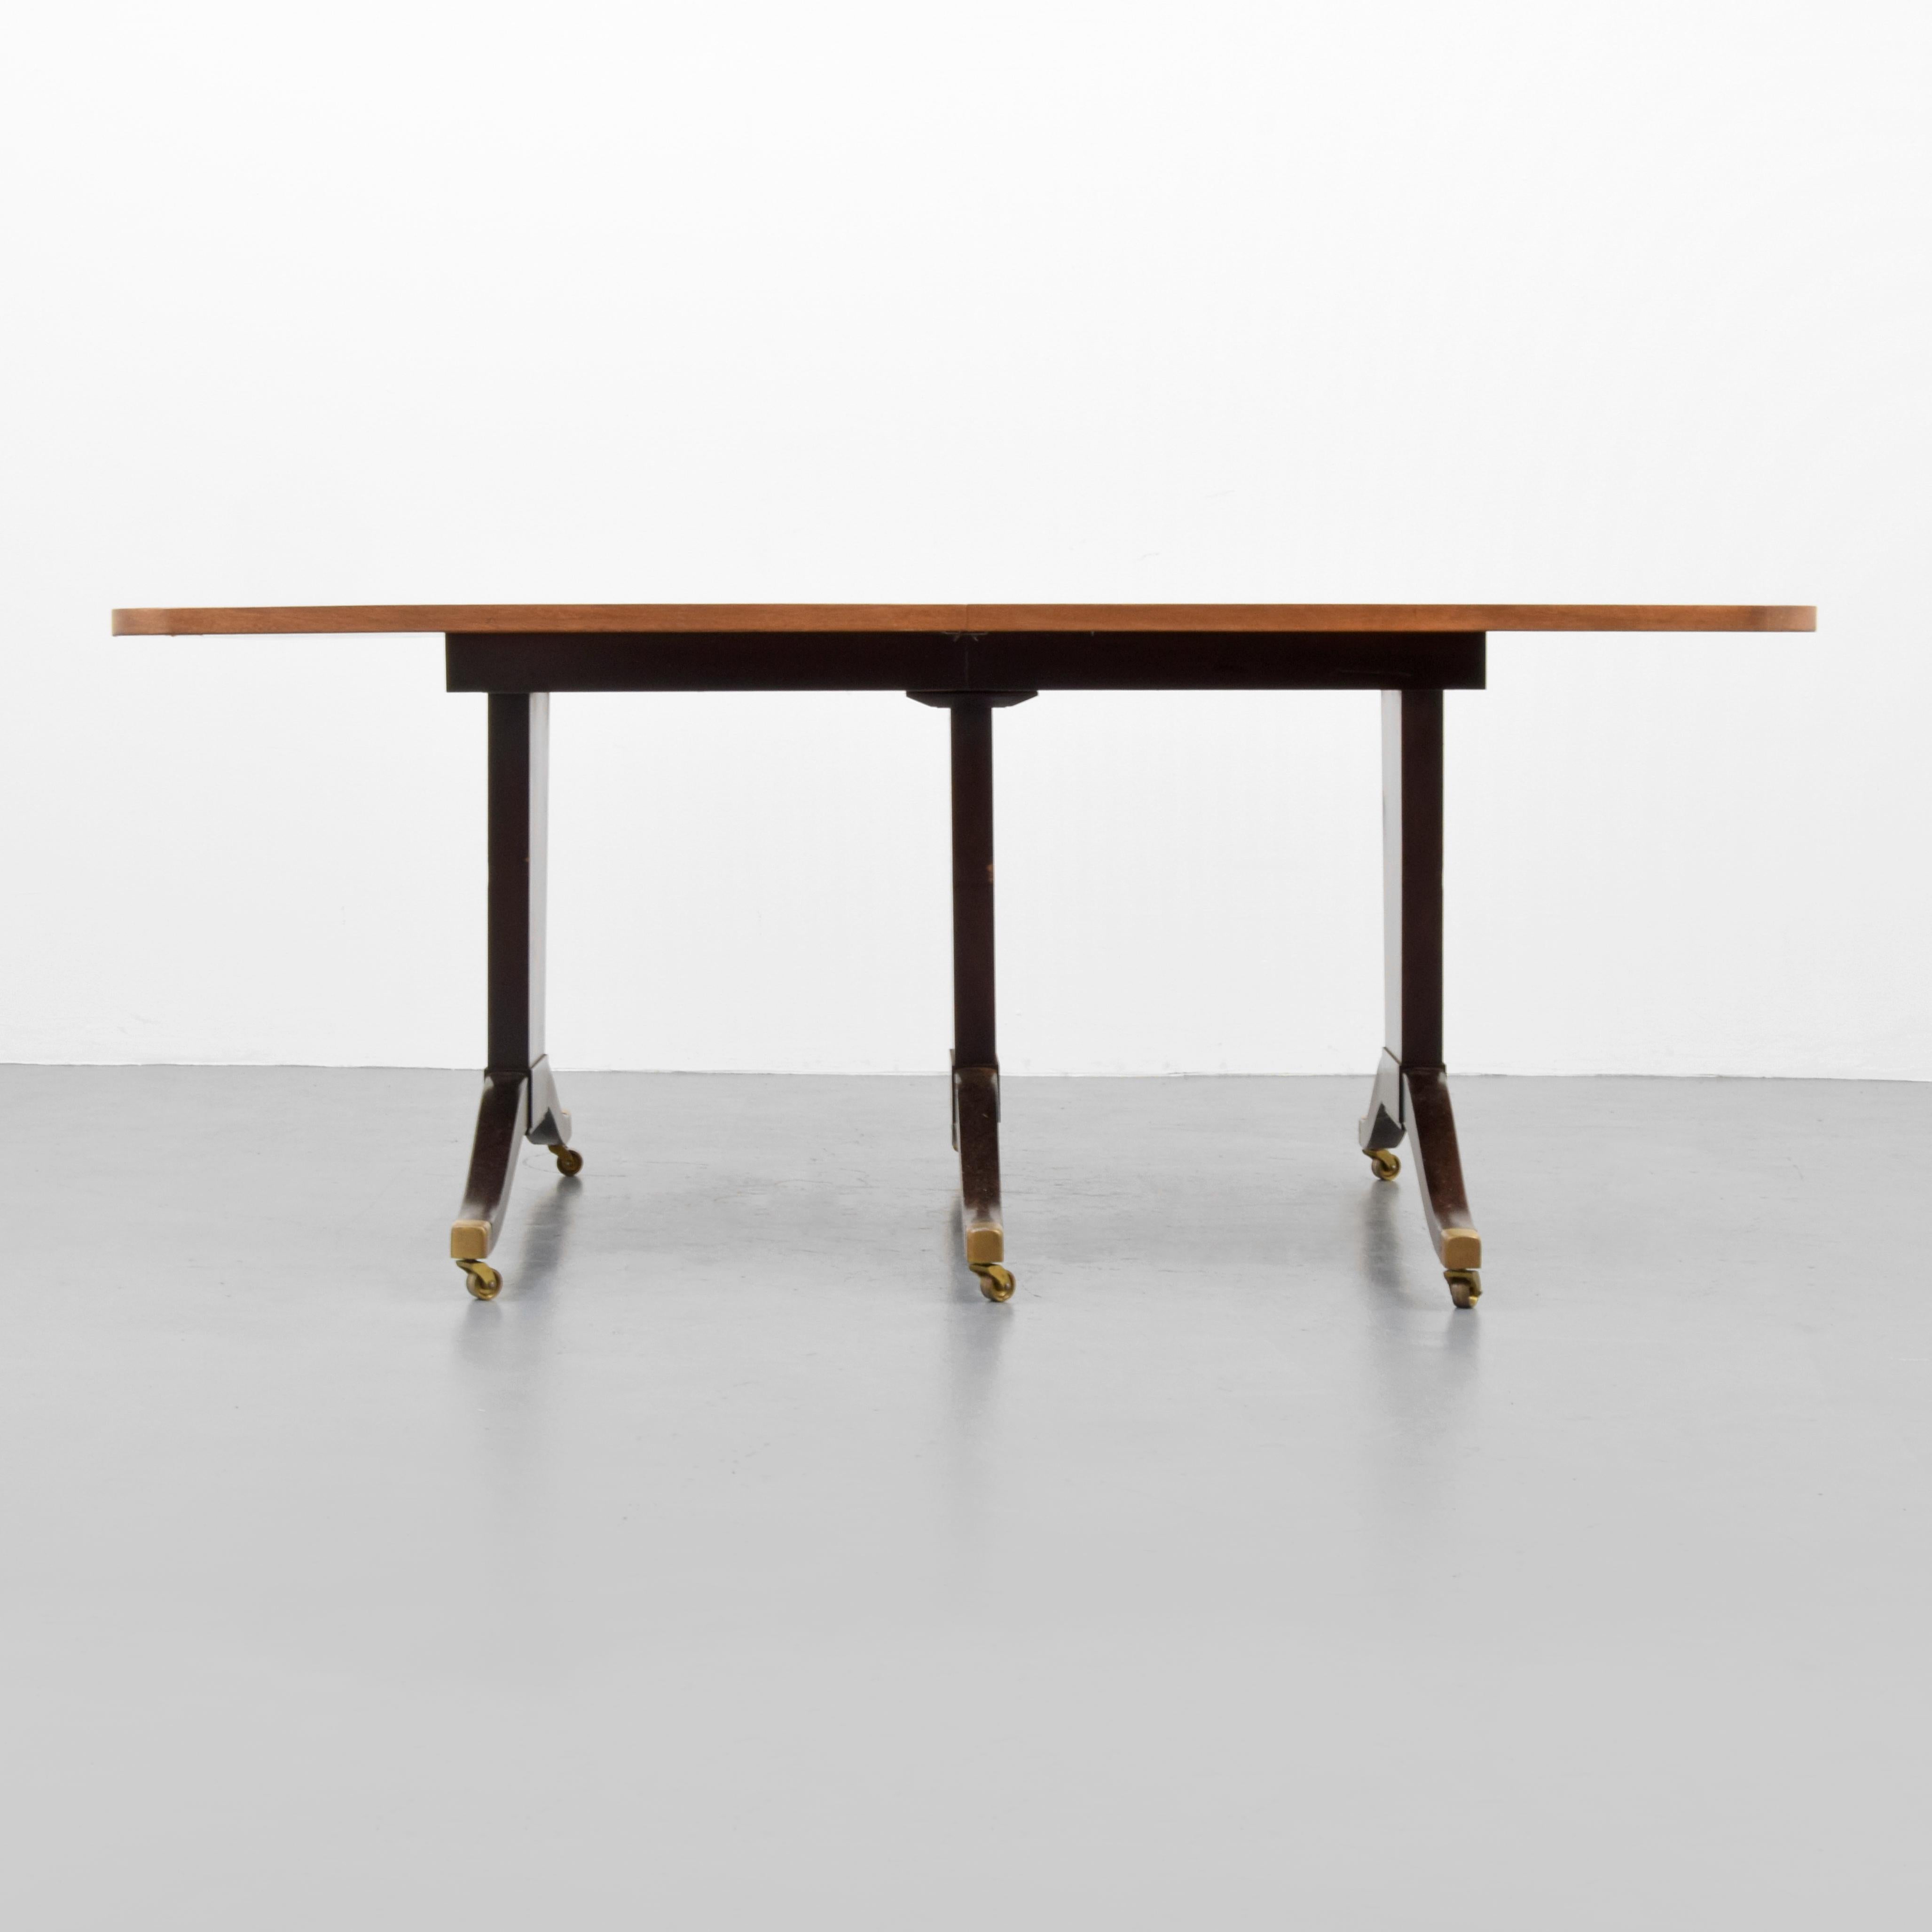 Wheeled dining table with two leaves by Edward Wormley for Dunbar.

Markings: Remnants of Dunbar label.
 